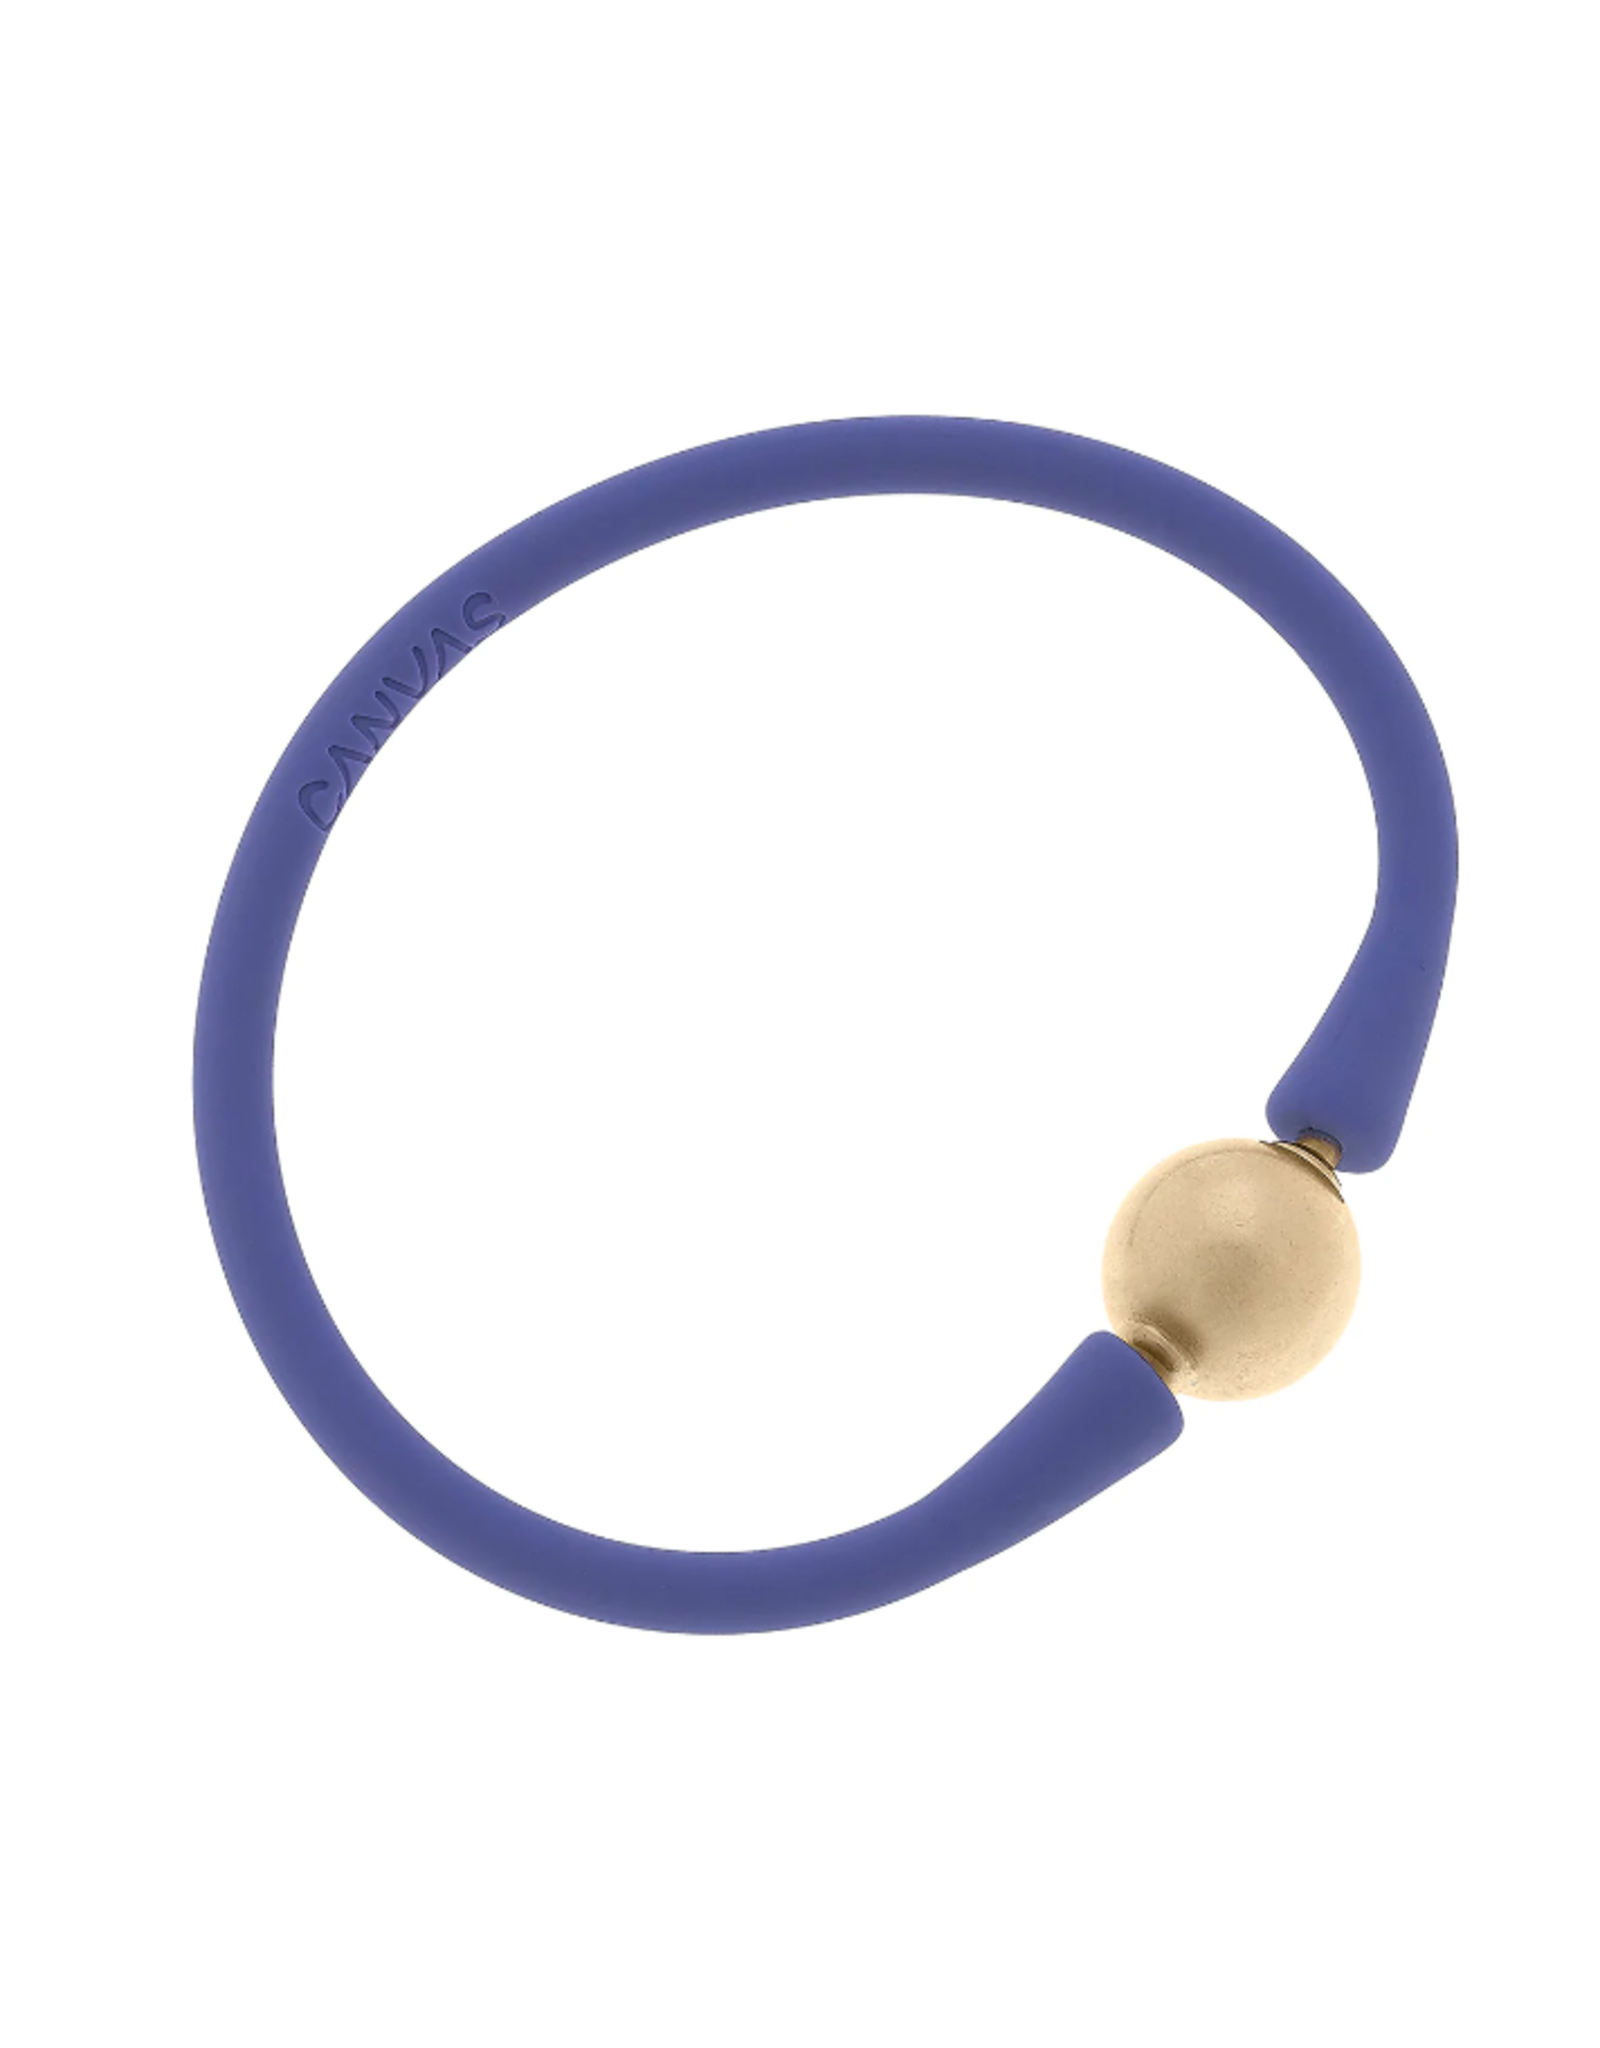 Bali 24K Gold Plated Ball Bead Silicone Bracelet Periwinkle